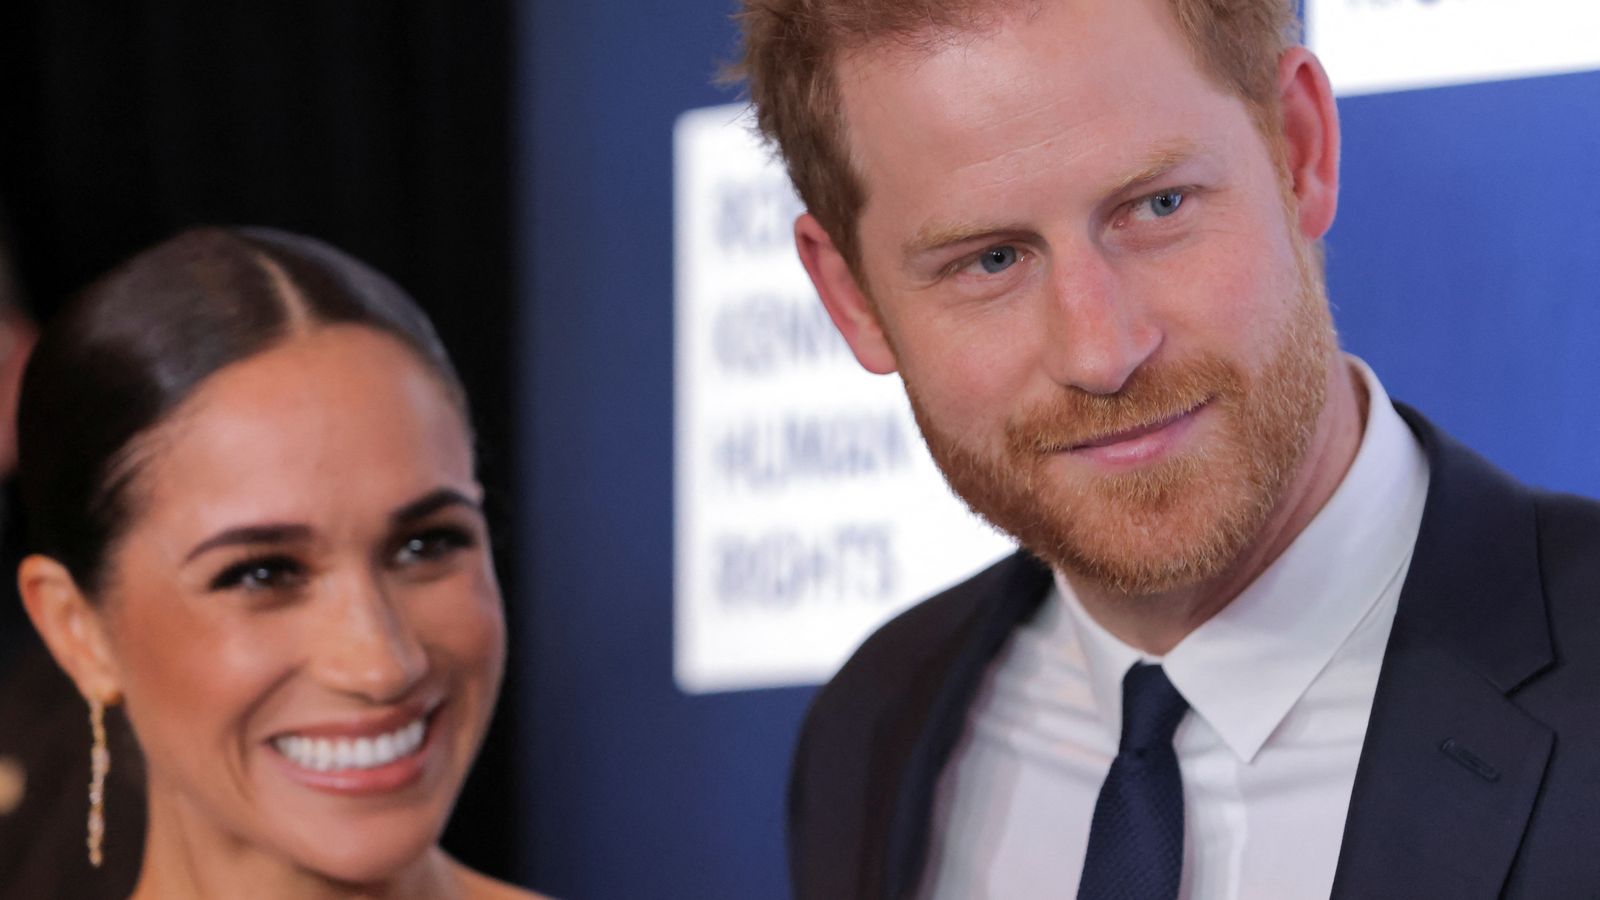 Harry and Meghan face questions about Royal Family at awards ceremony - as Netflix release looms